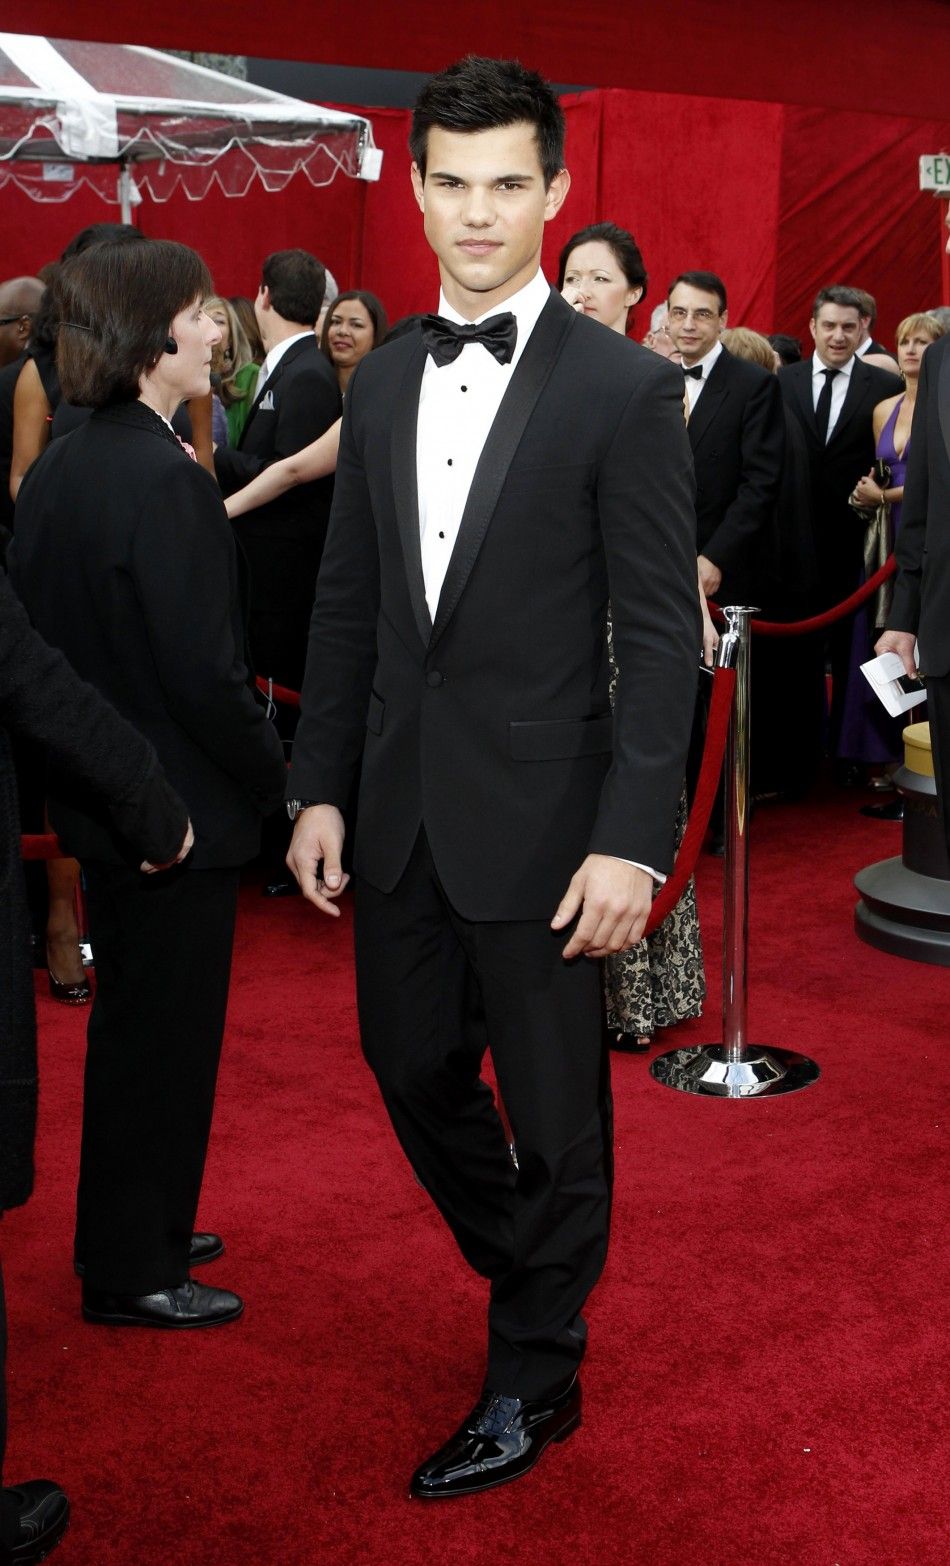 Taylor Lautner arrives at the 82nd Academy Awards in Hollywood